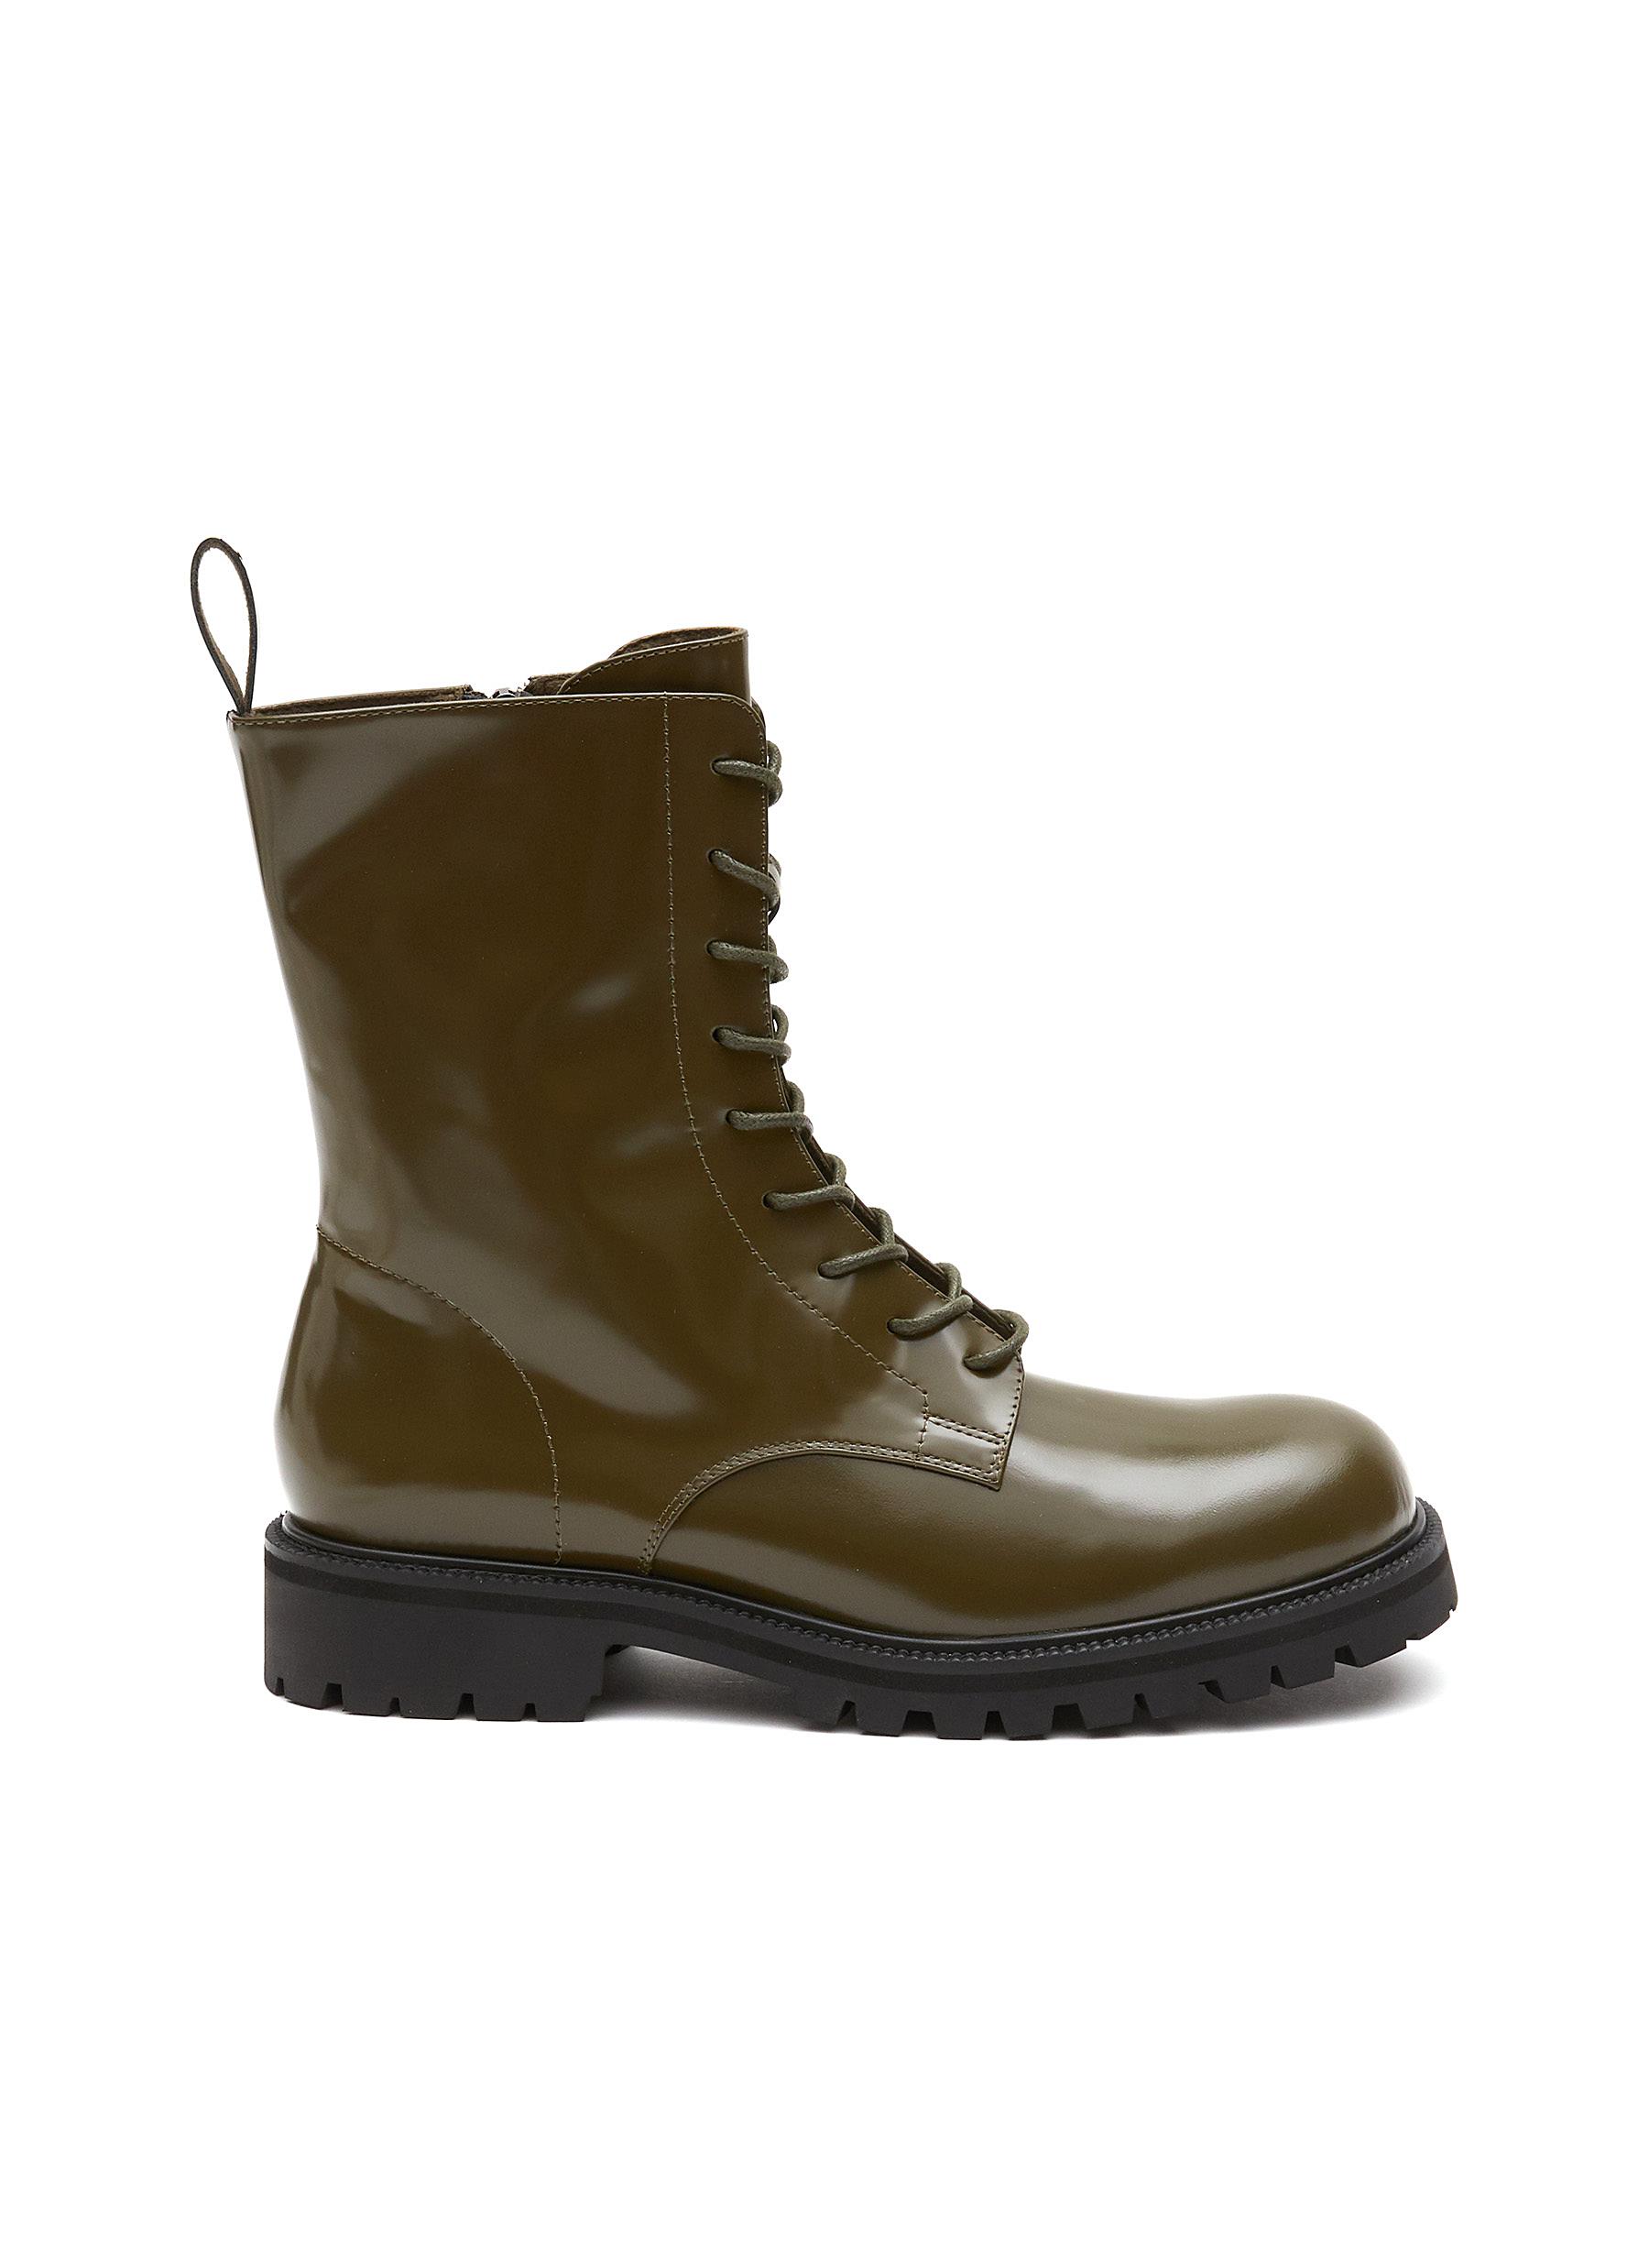 'Cammy' Lug Sole Leather Combat Boots